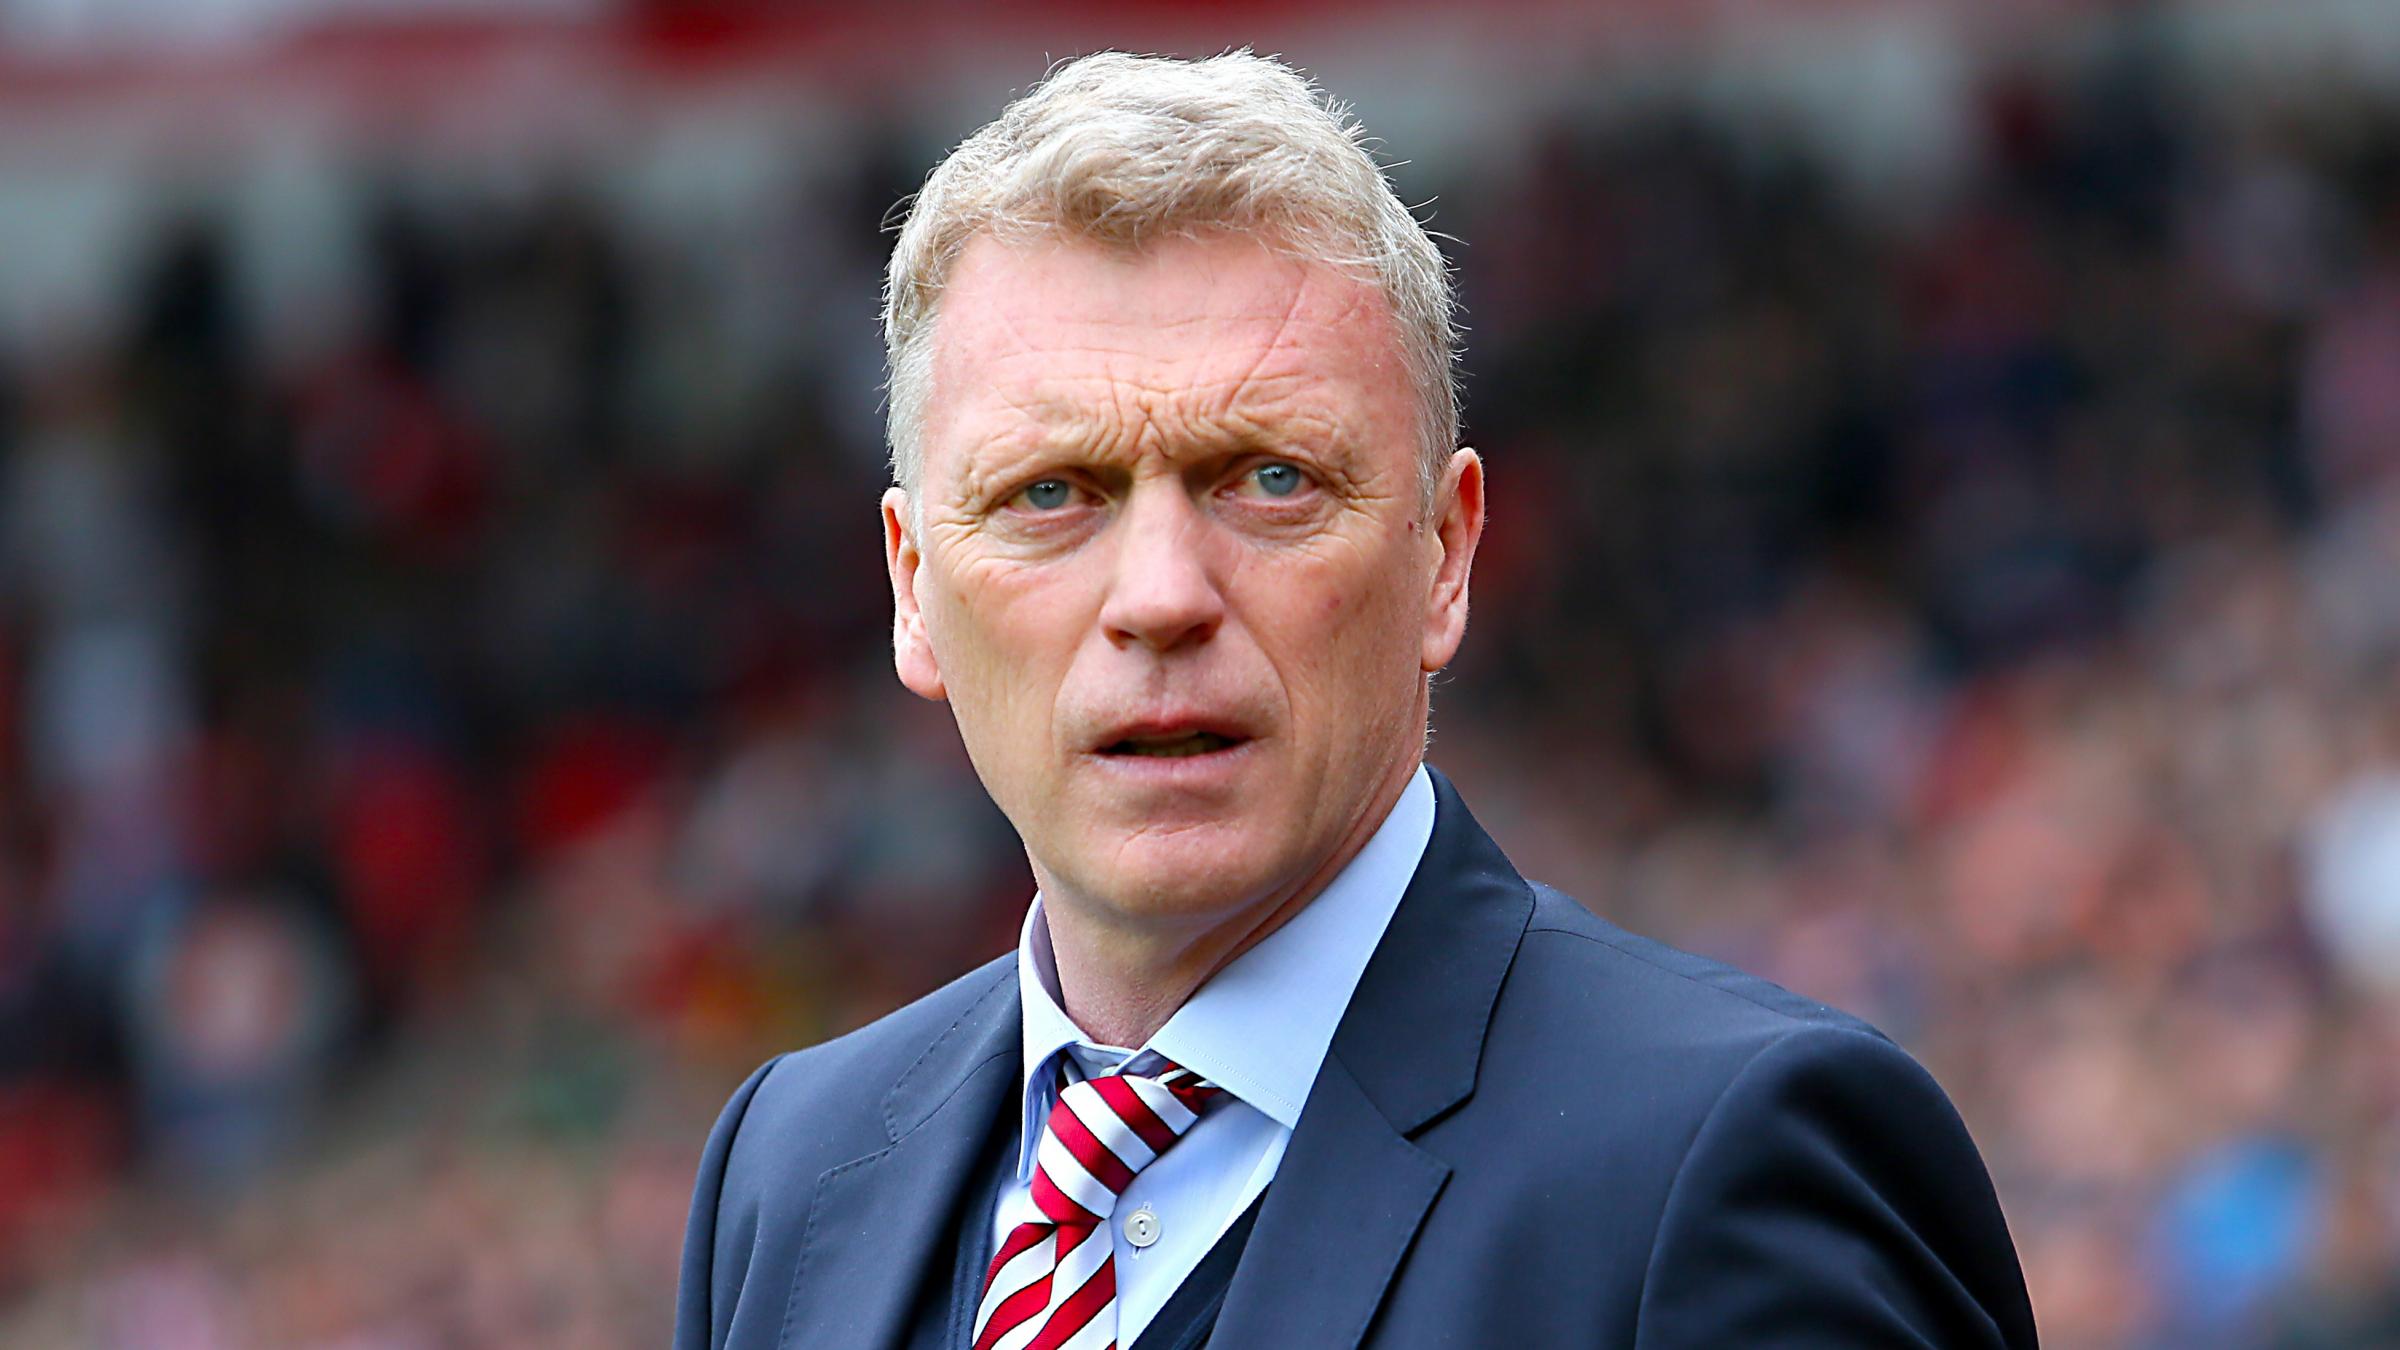 David Moyes resigns as manager of Sunderland - The Wiltshire Gazette and Herald